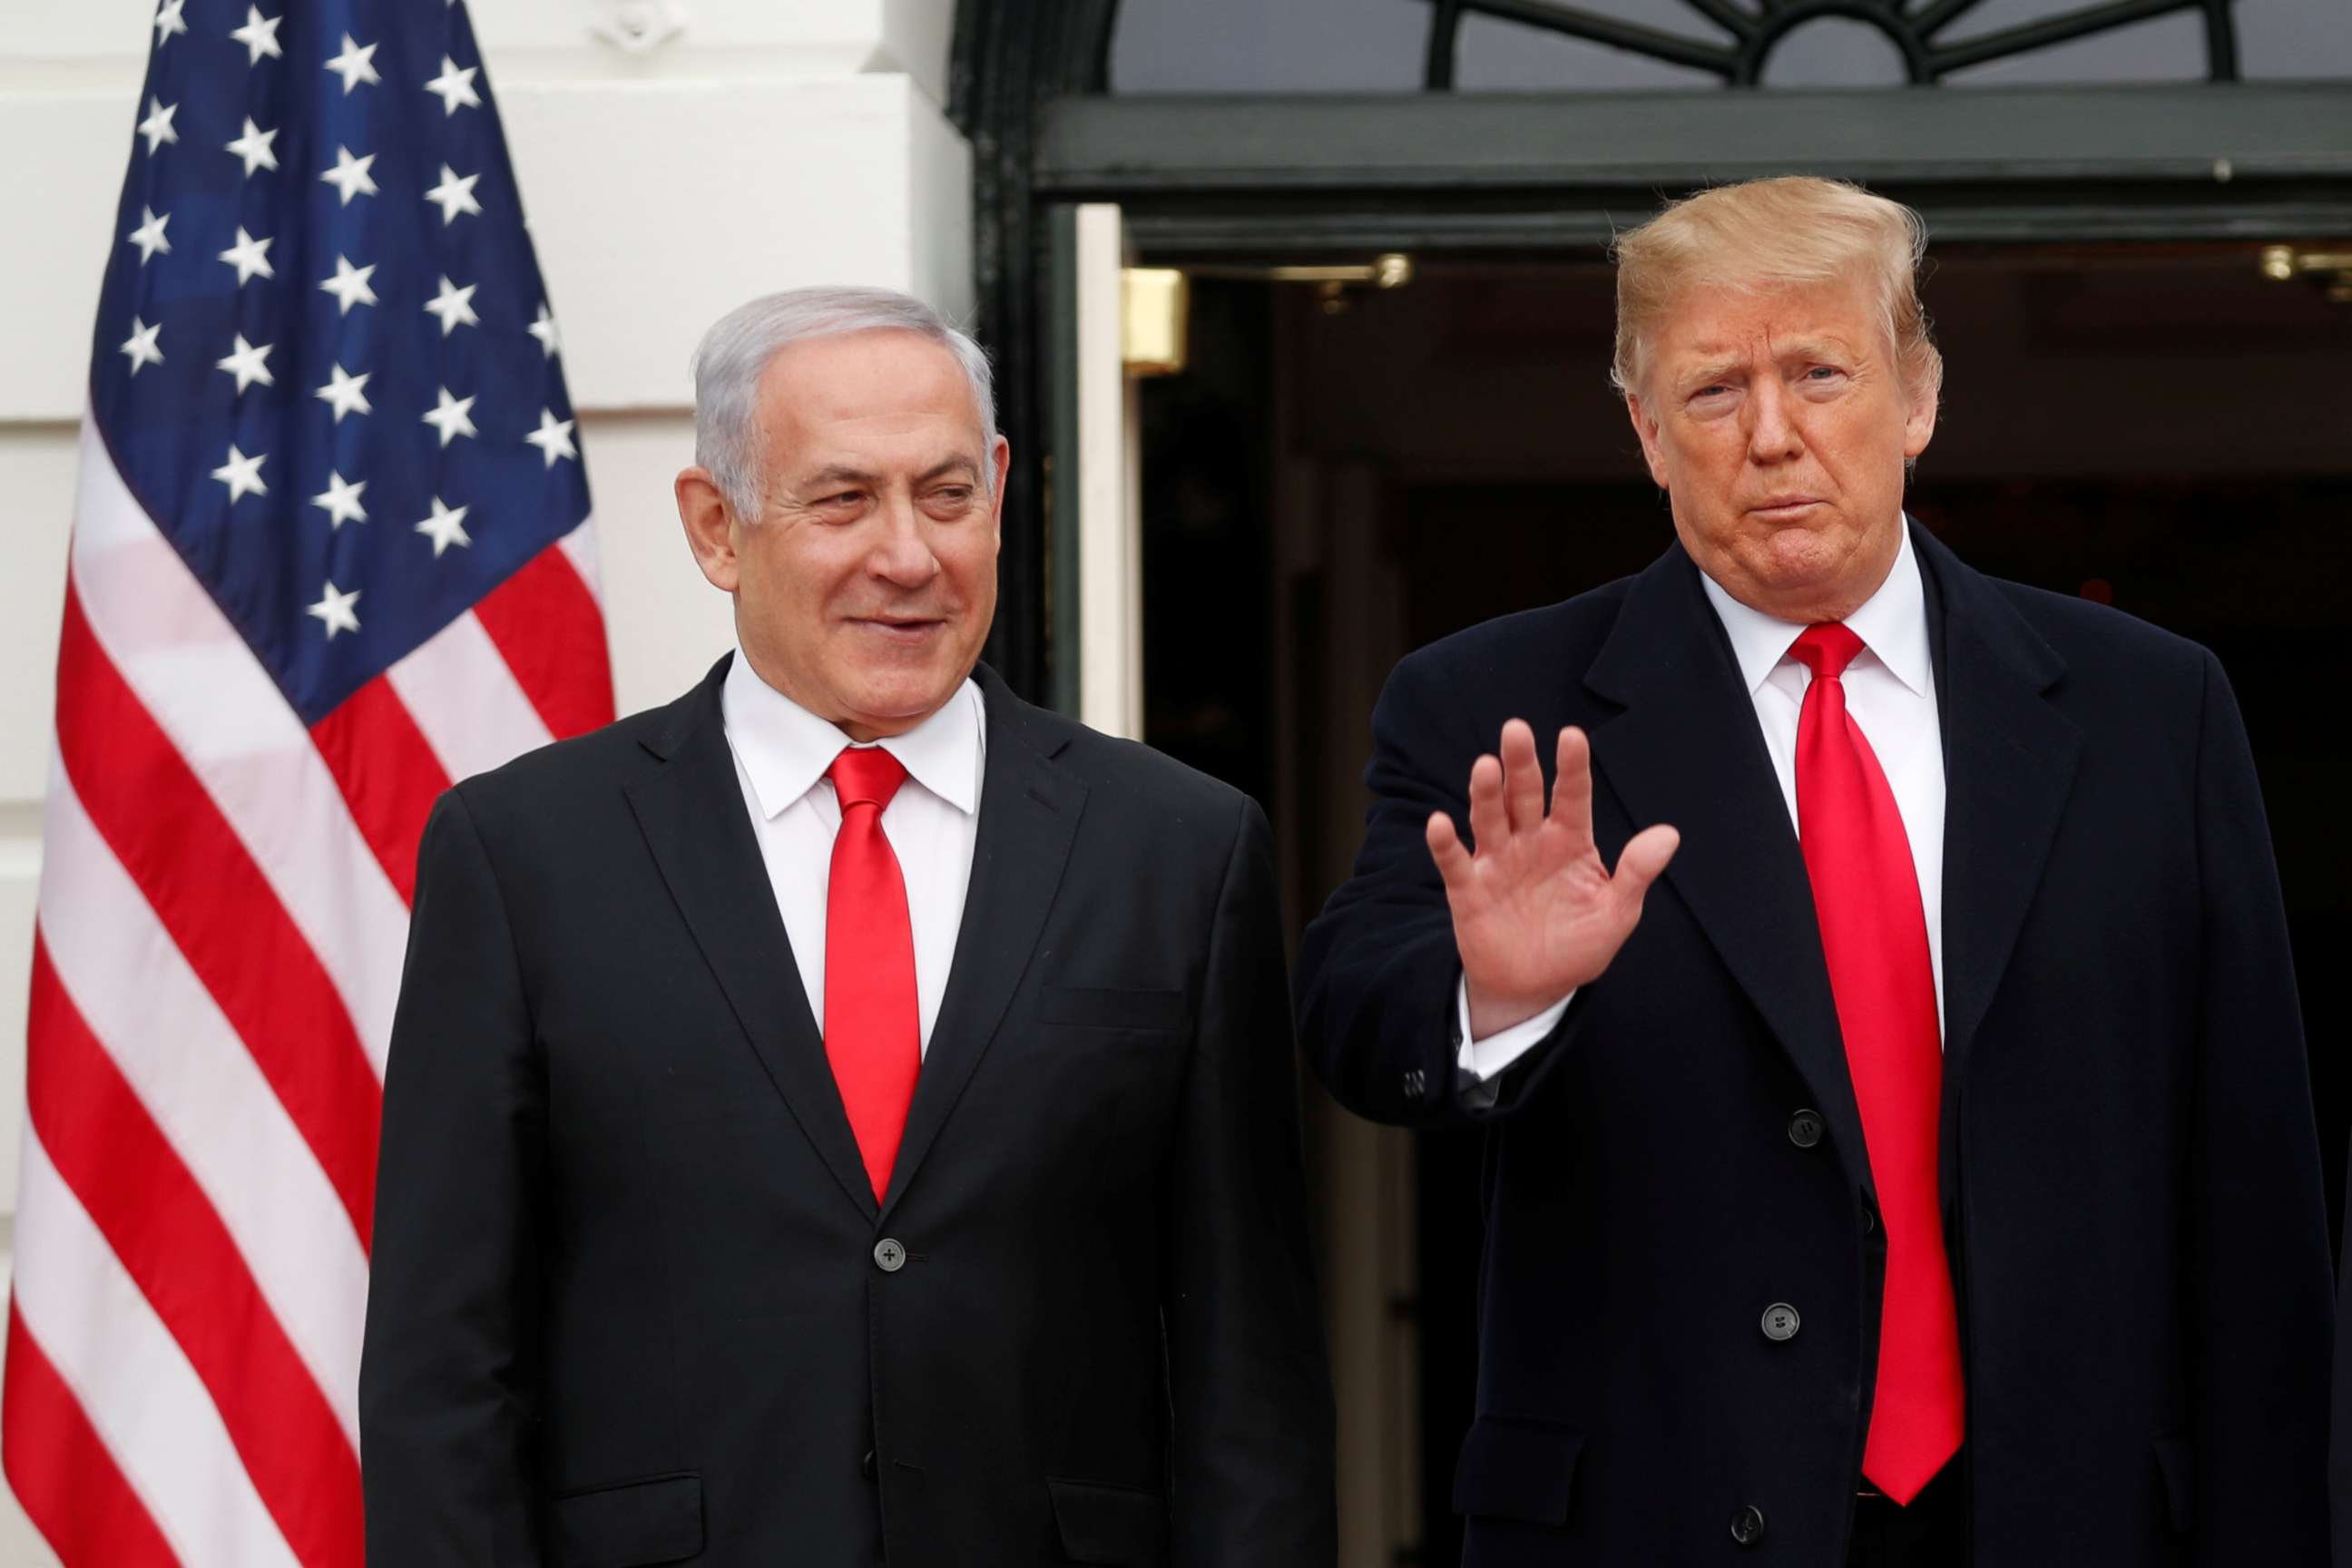 PHOTO: President Donald Trump gestures to gathered news media as he welcomes Israel Prime Minister Benjamin Netanyahu to the White House, March 25, 2019. 